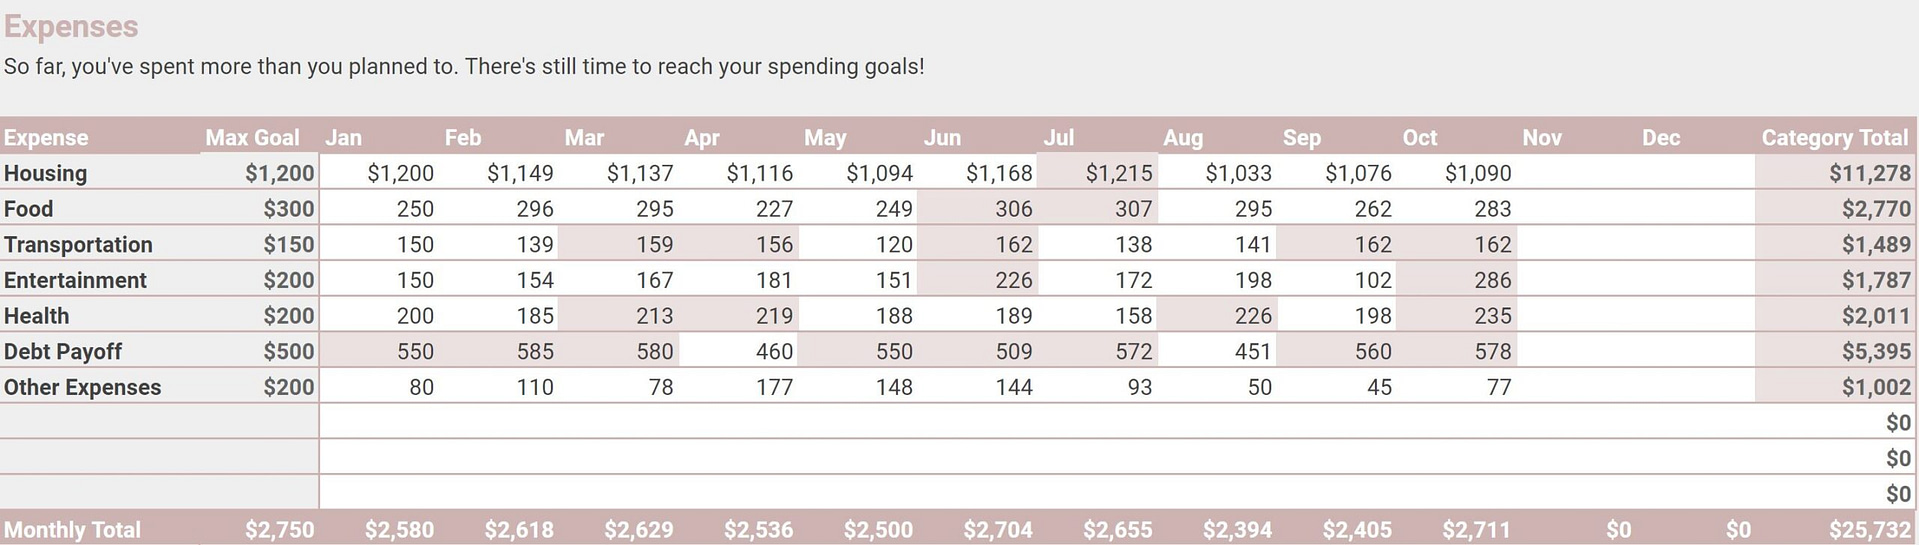 Spending progress per category by month